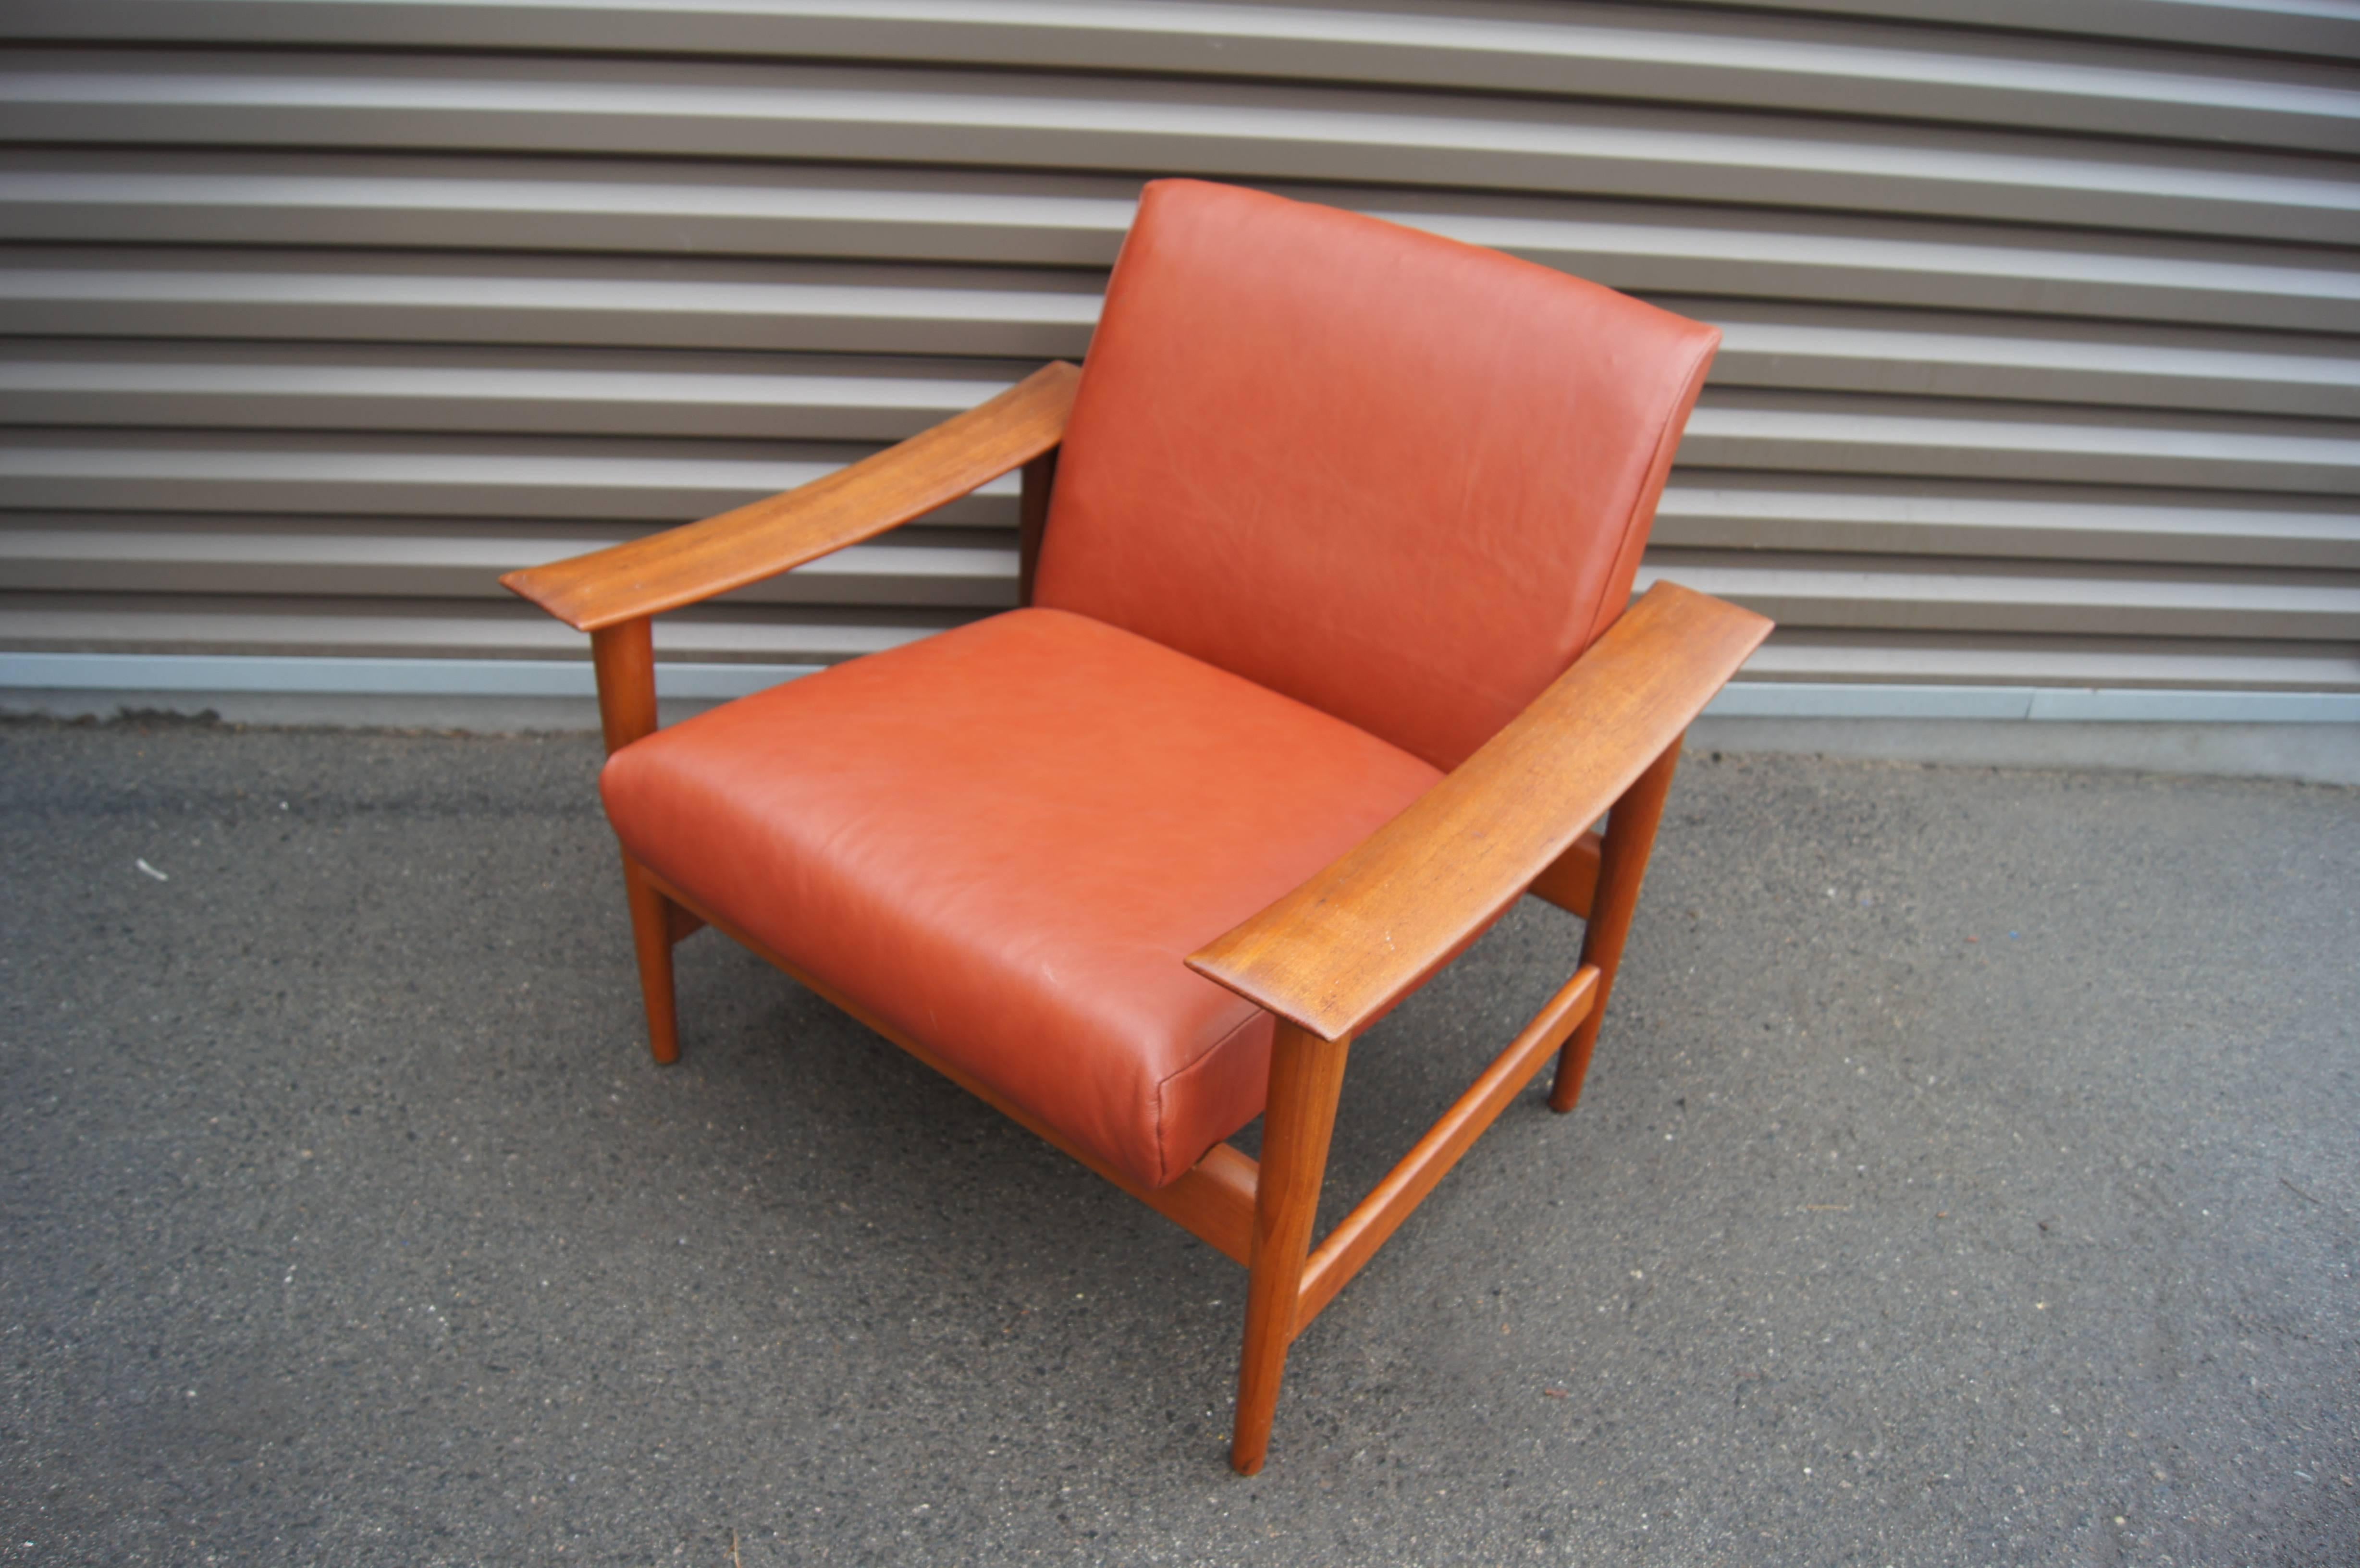 Its broad carved arms give this Danish modern lounge chair its distinctive character. The solid teak frame cradles a comfortable seat upholstered in a warm brick leather.
 